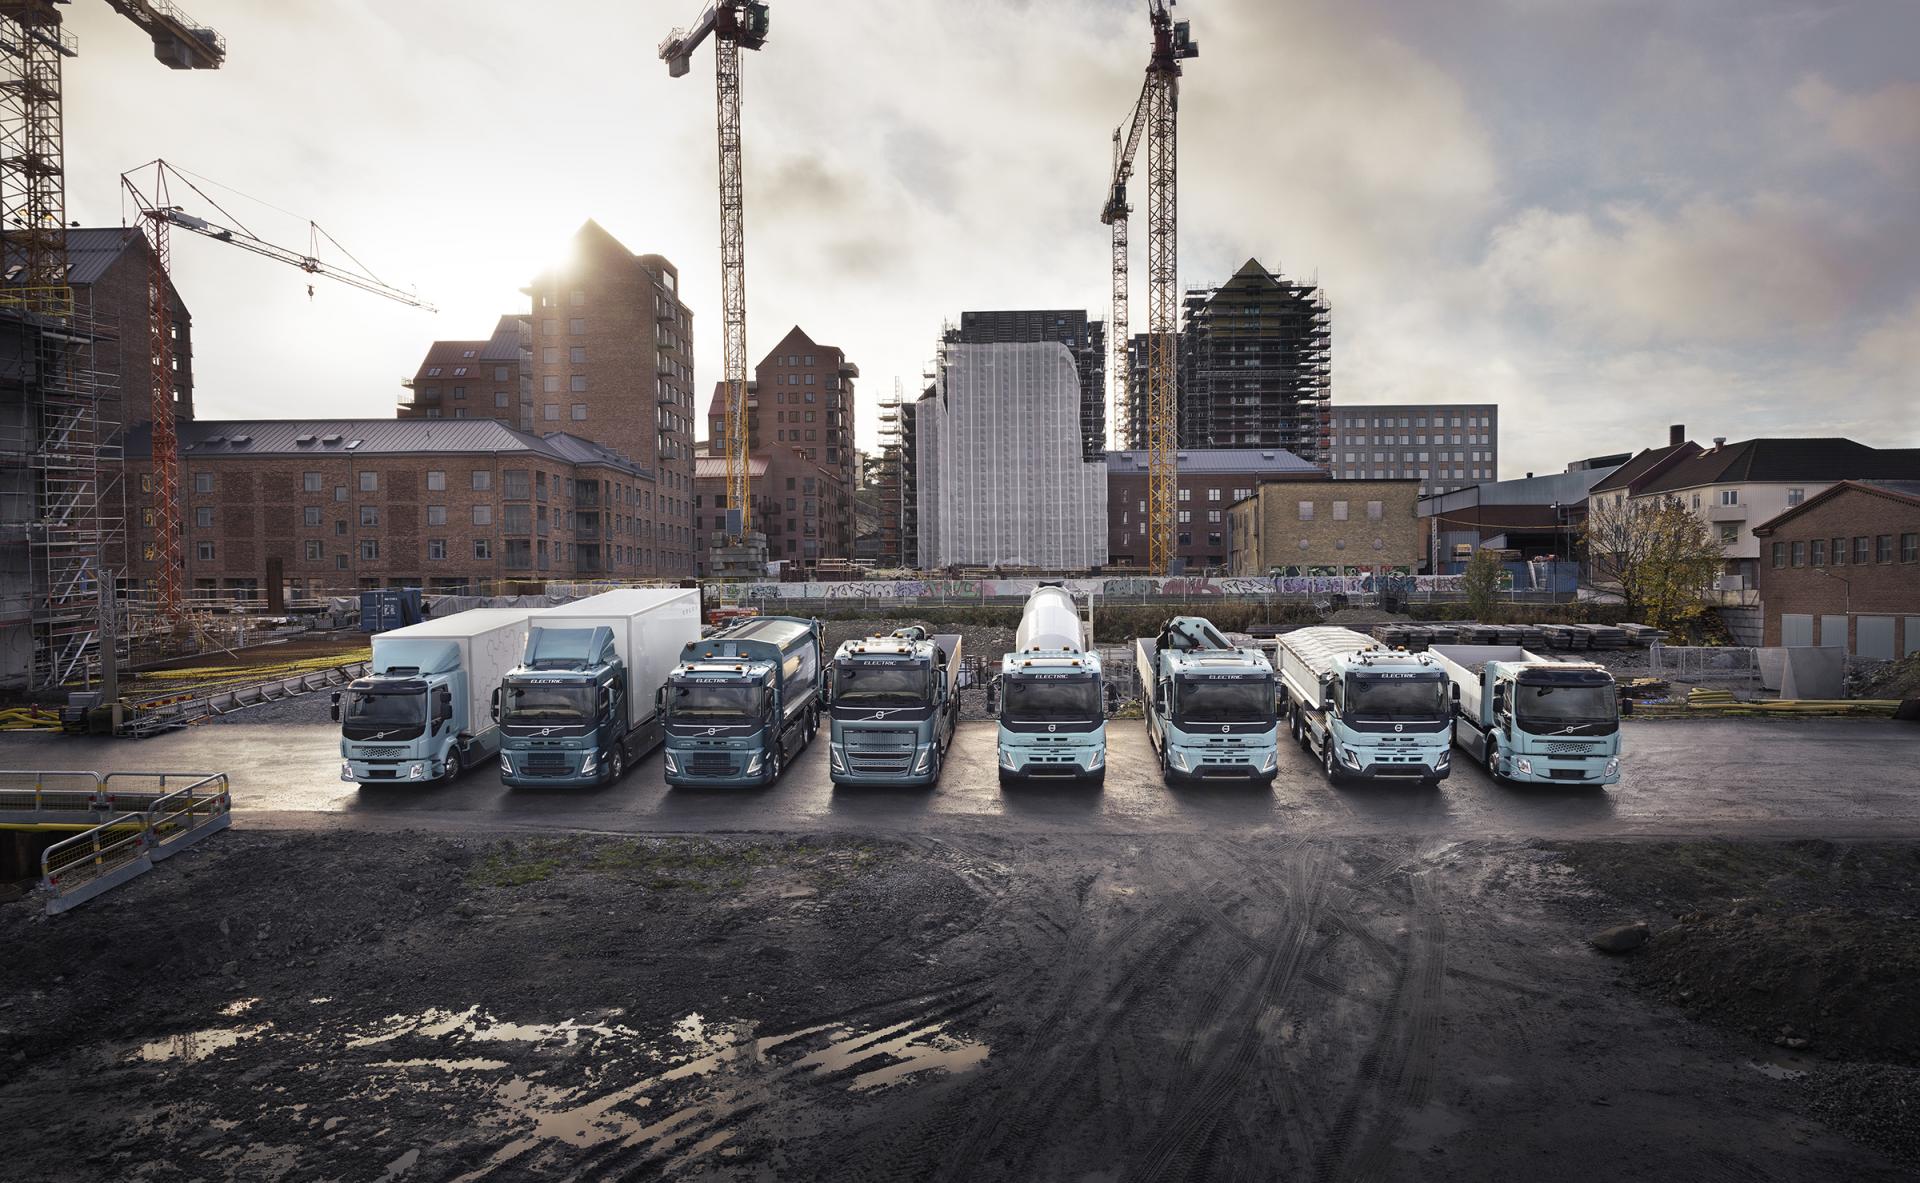 Volvo receives record order for up to 1,000 electric trucks